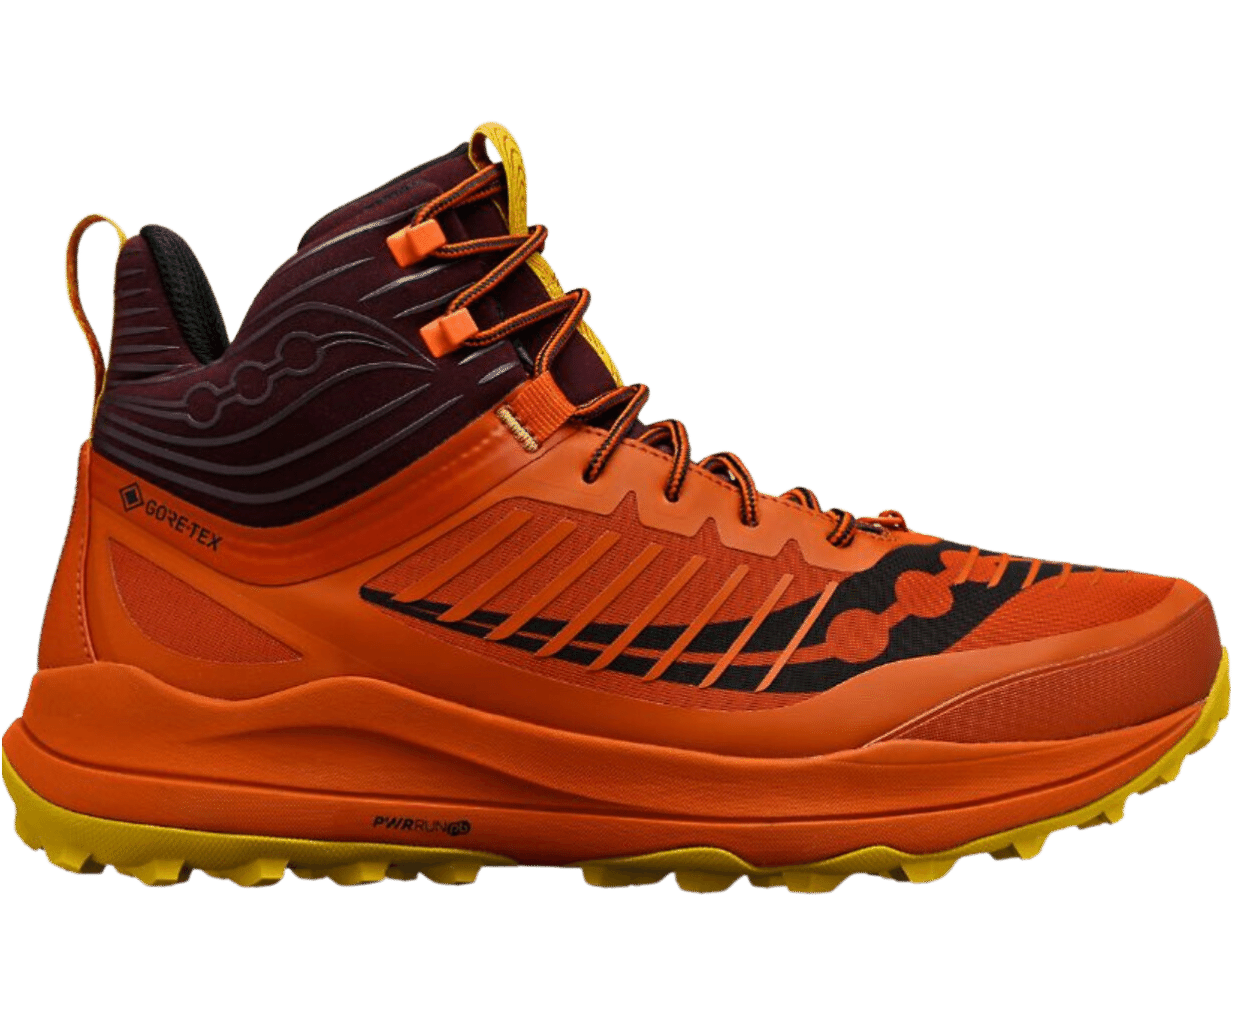 Saucony Ultra Ridge GTX Review: Long Live The Boot - Believe in